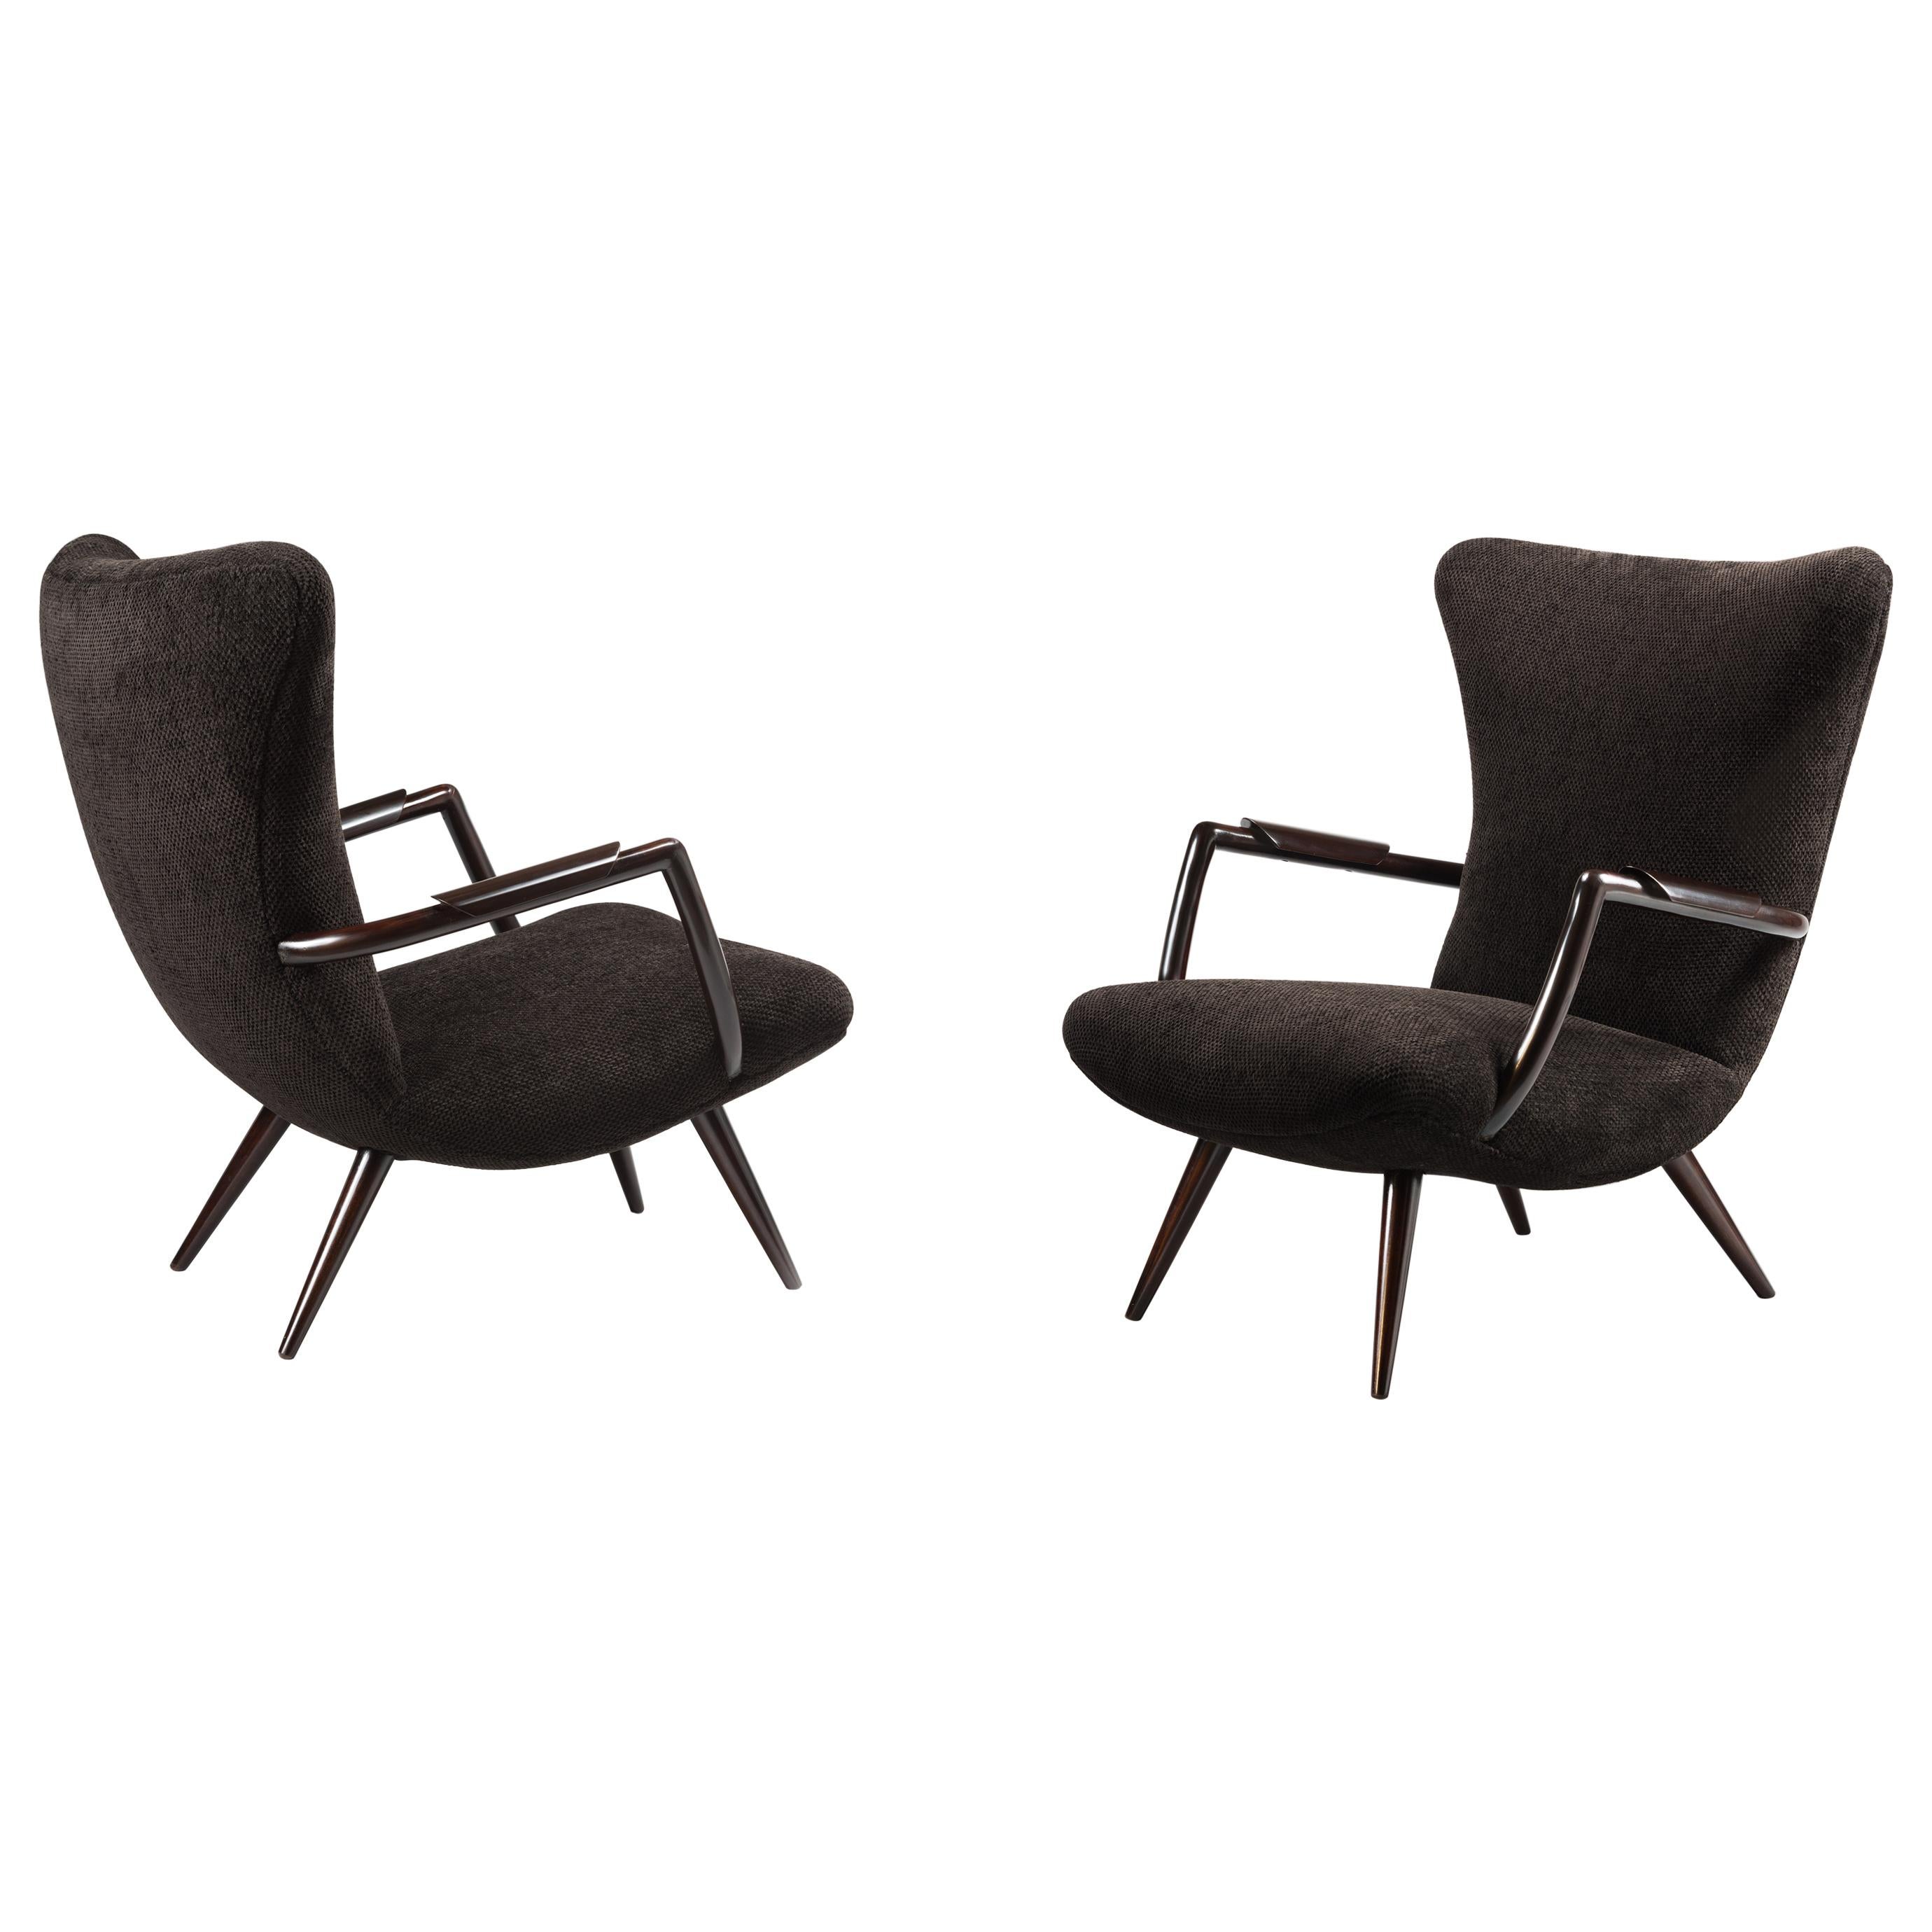 Pair of Armchairs by Giuseppe Scapinelli, circa 1950